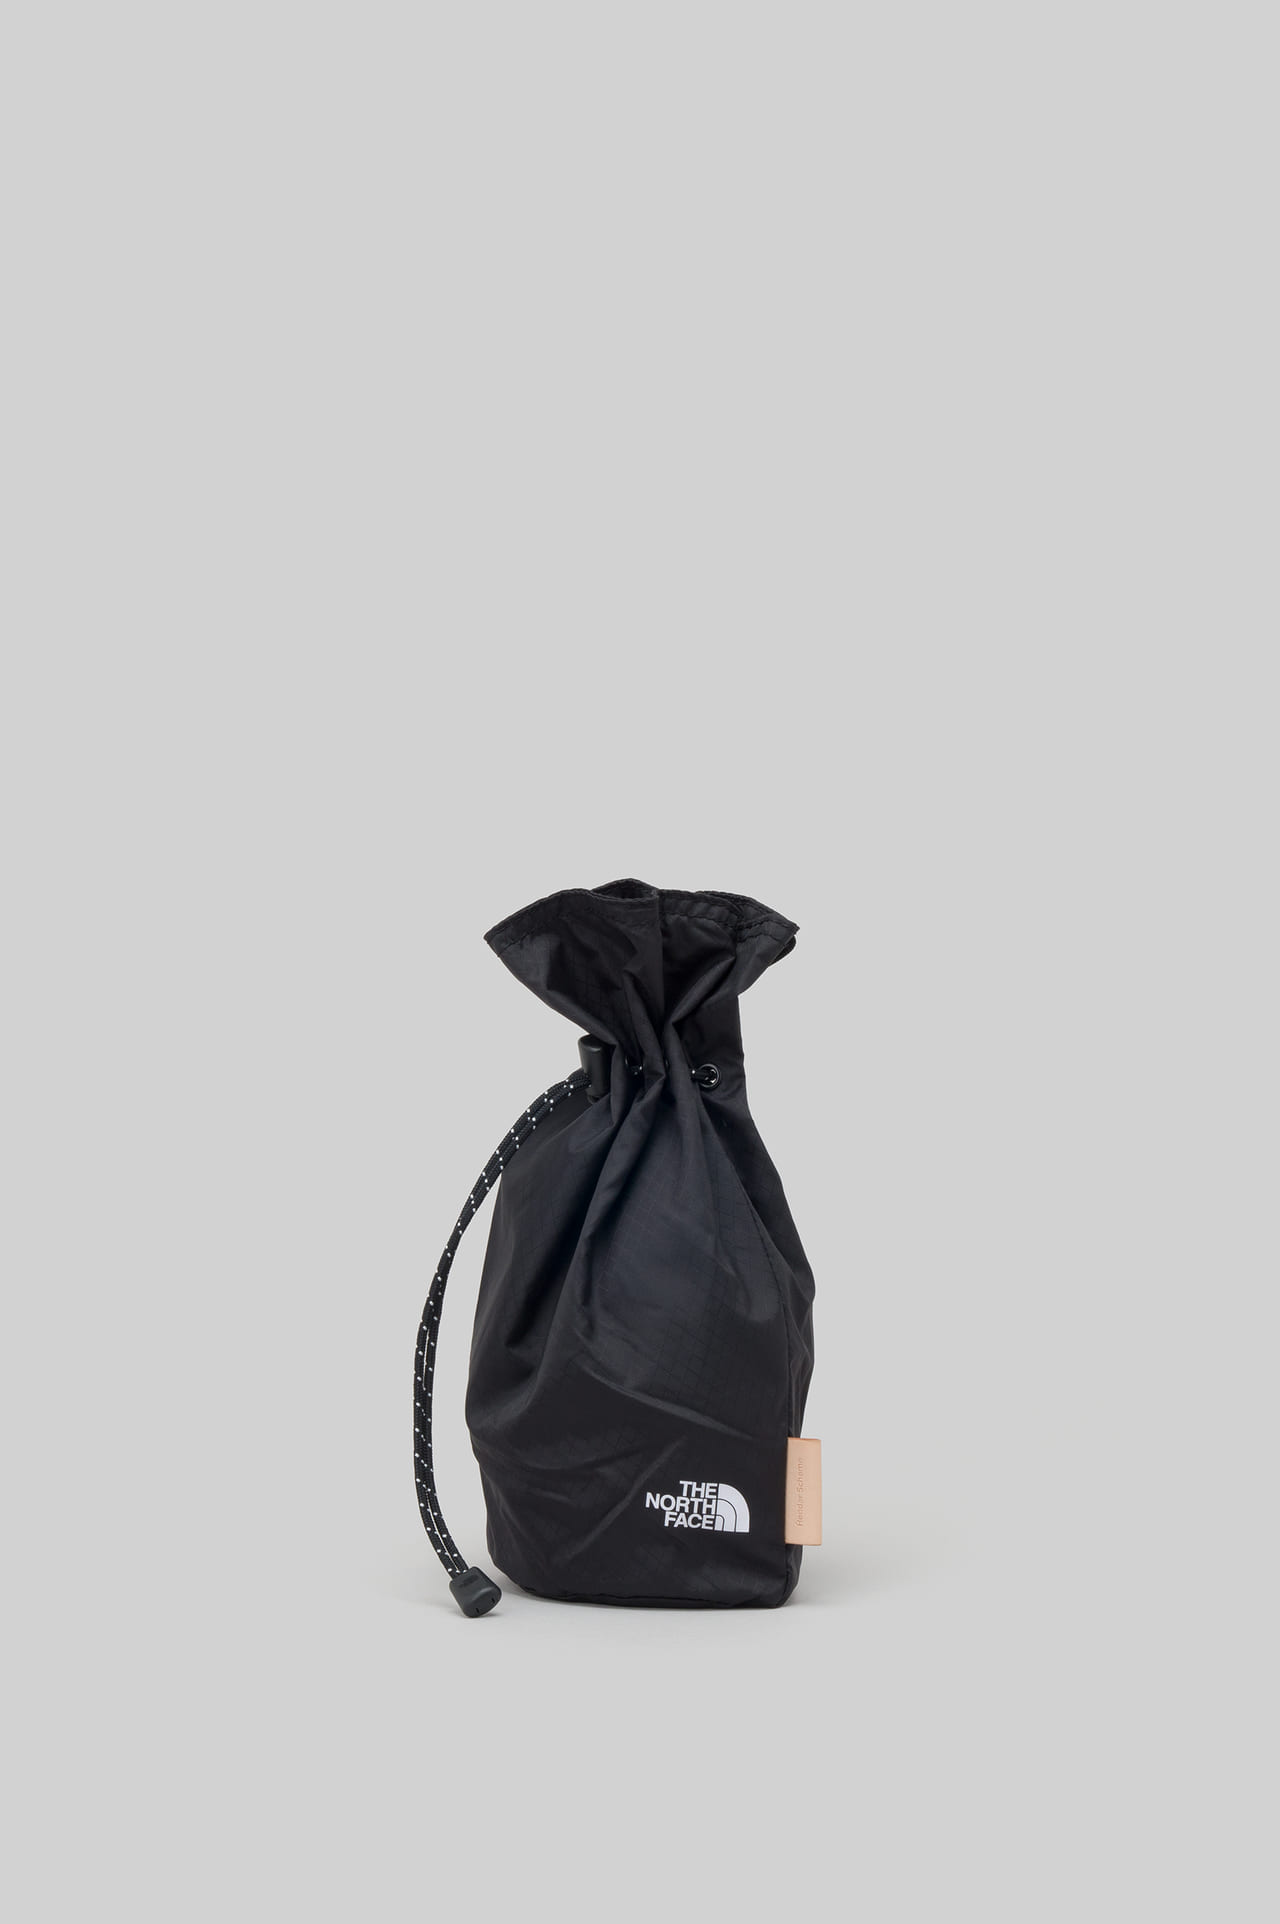 Hender Scheme THE NORTH FACE Pouch Kit - ショルダーバッグ